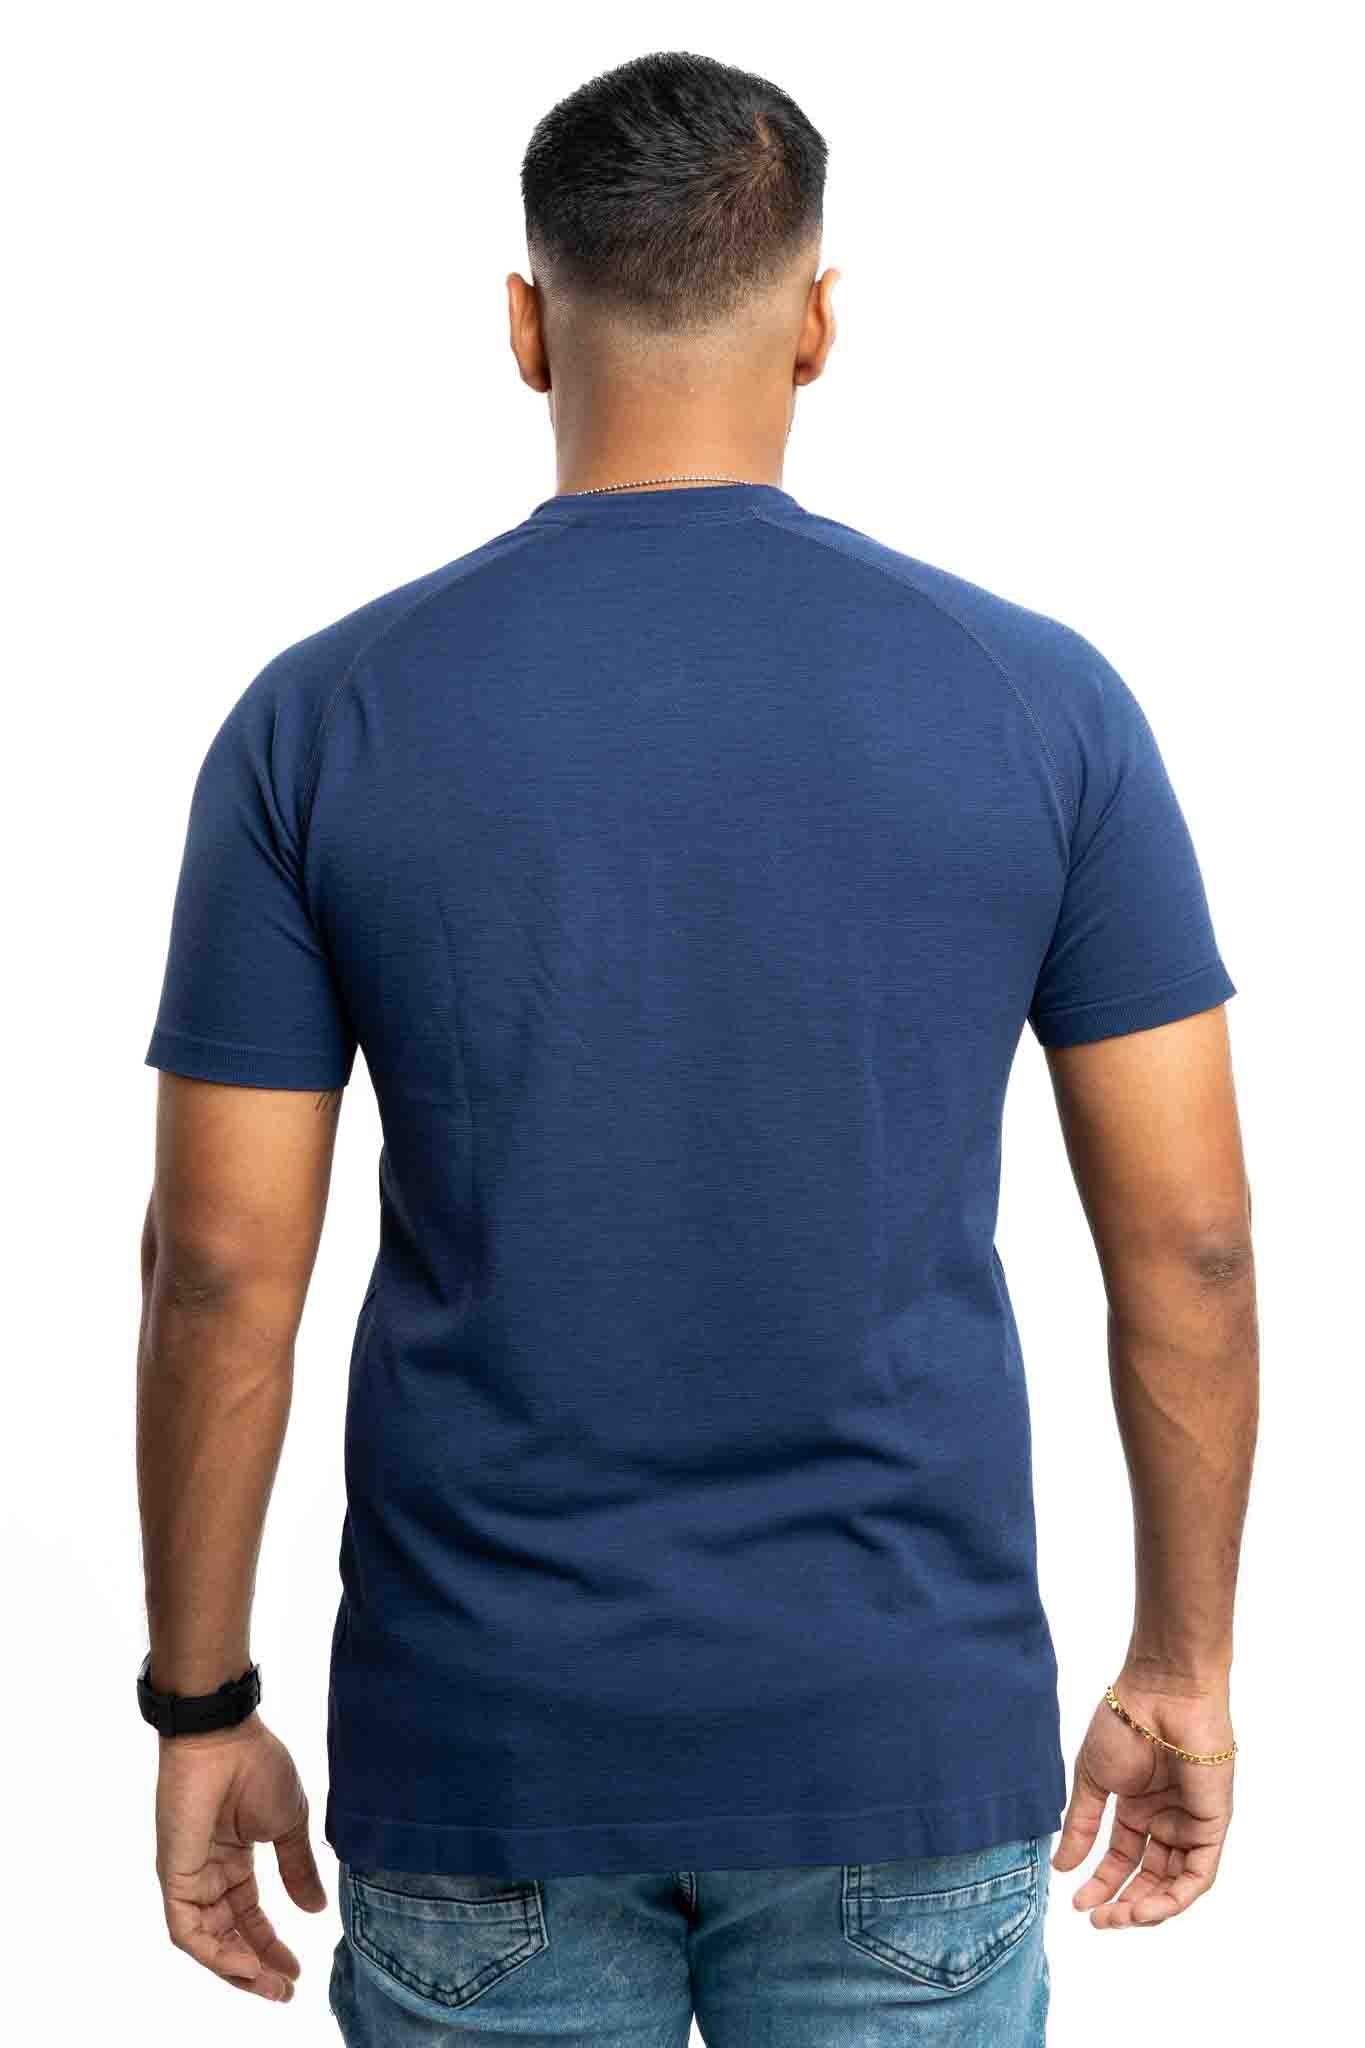 Classic Seamless Henly polo Tee